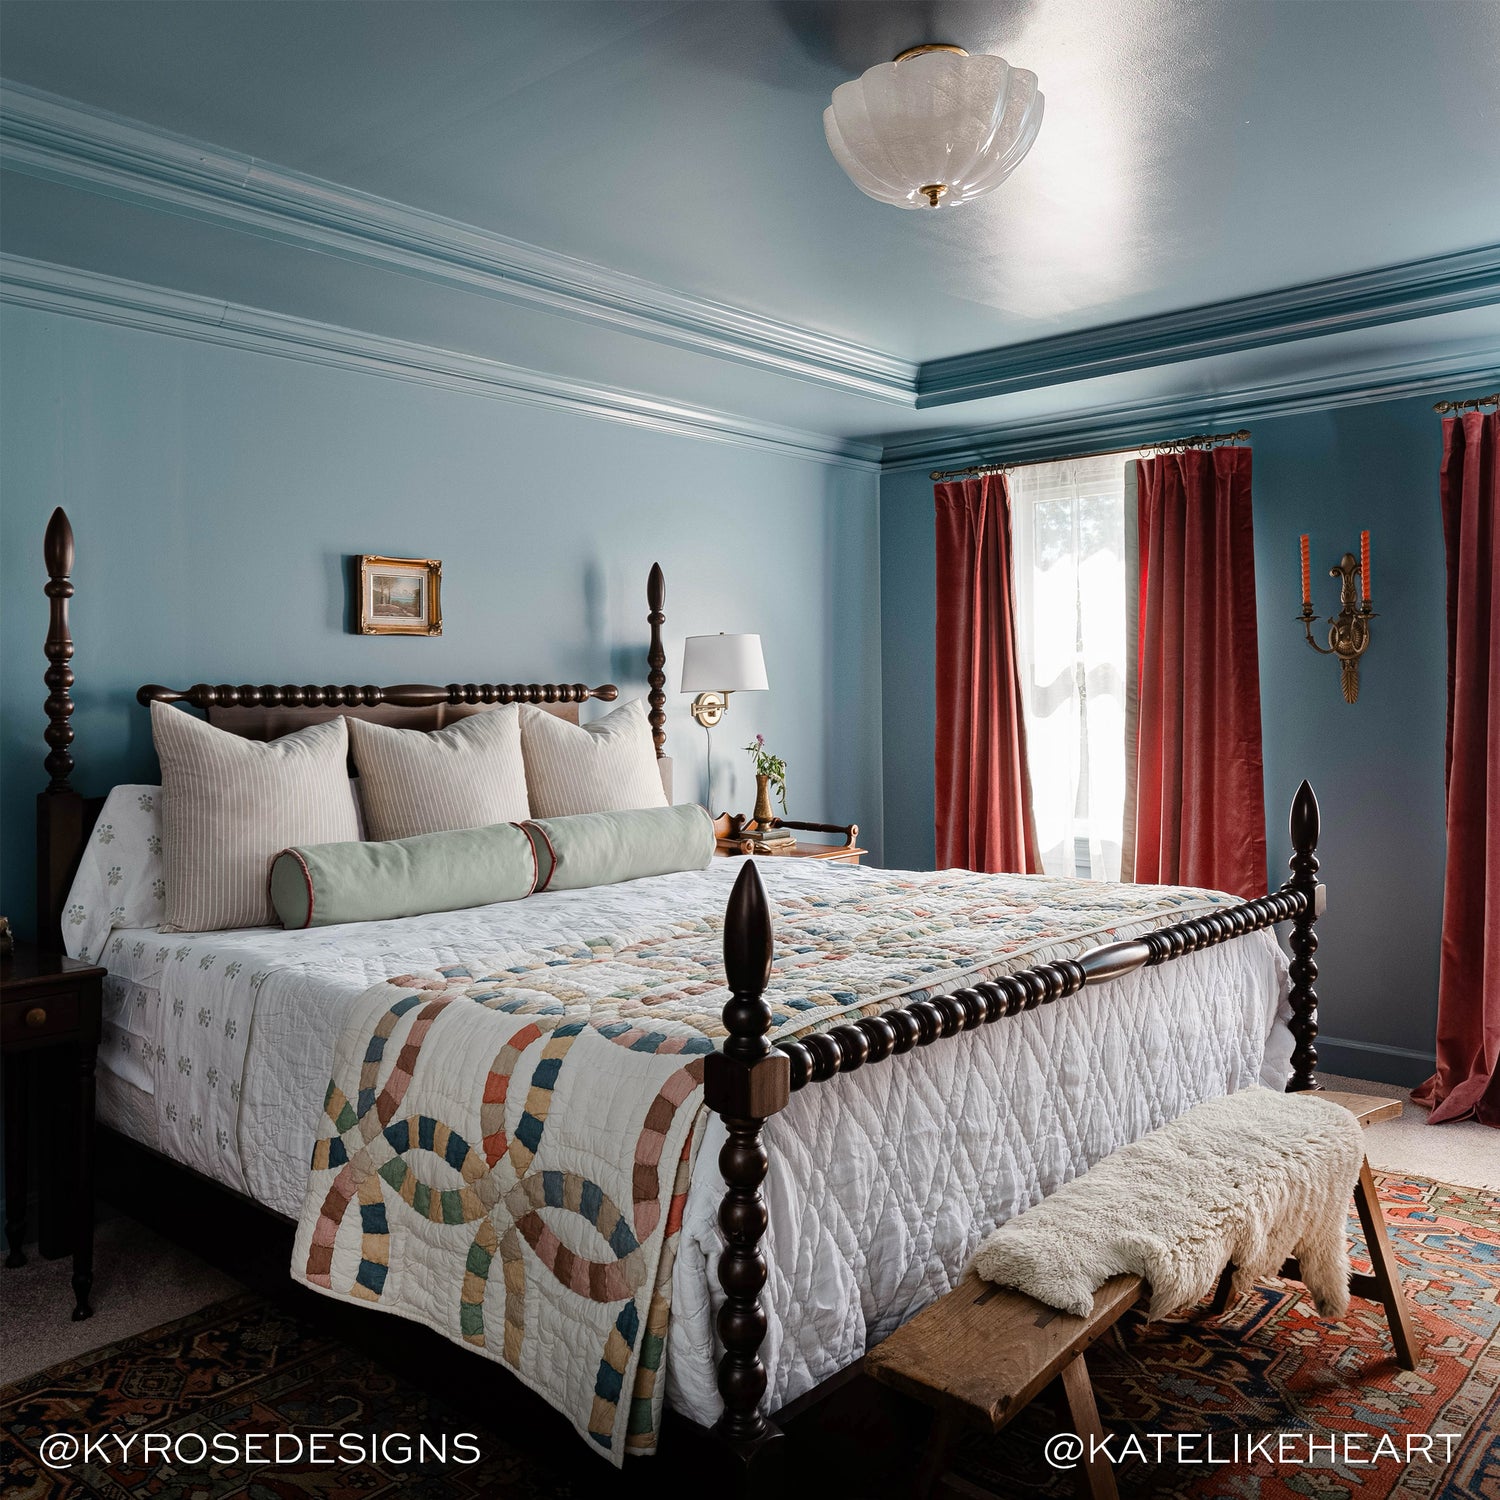 blue bedroom with a brown wooden bed with white bedding and sage green bolster pillows, coral velvet curtains hung in front of illuminated windows and a red multicolored rug under the bed